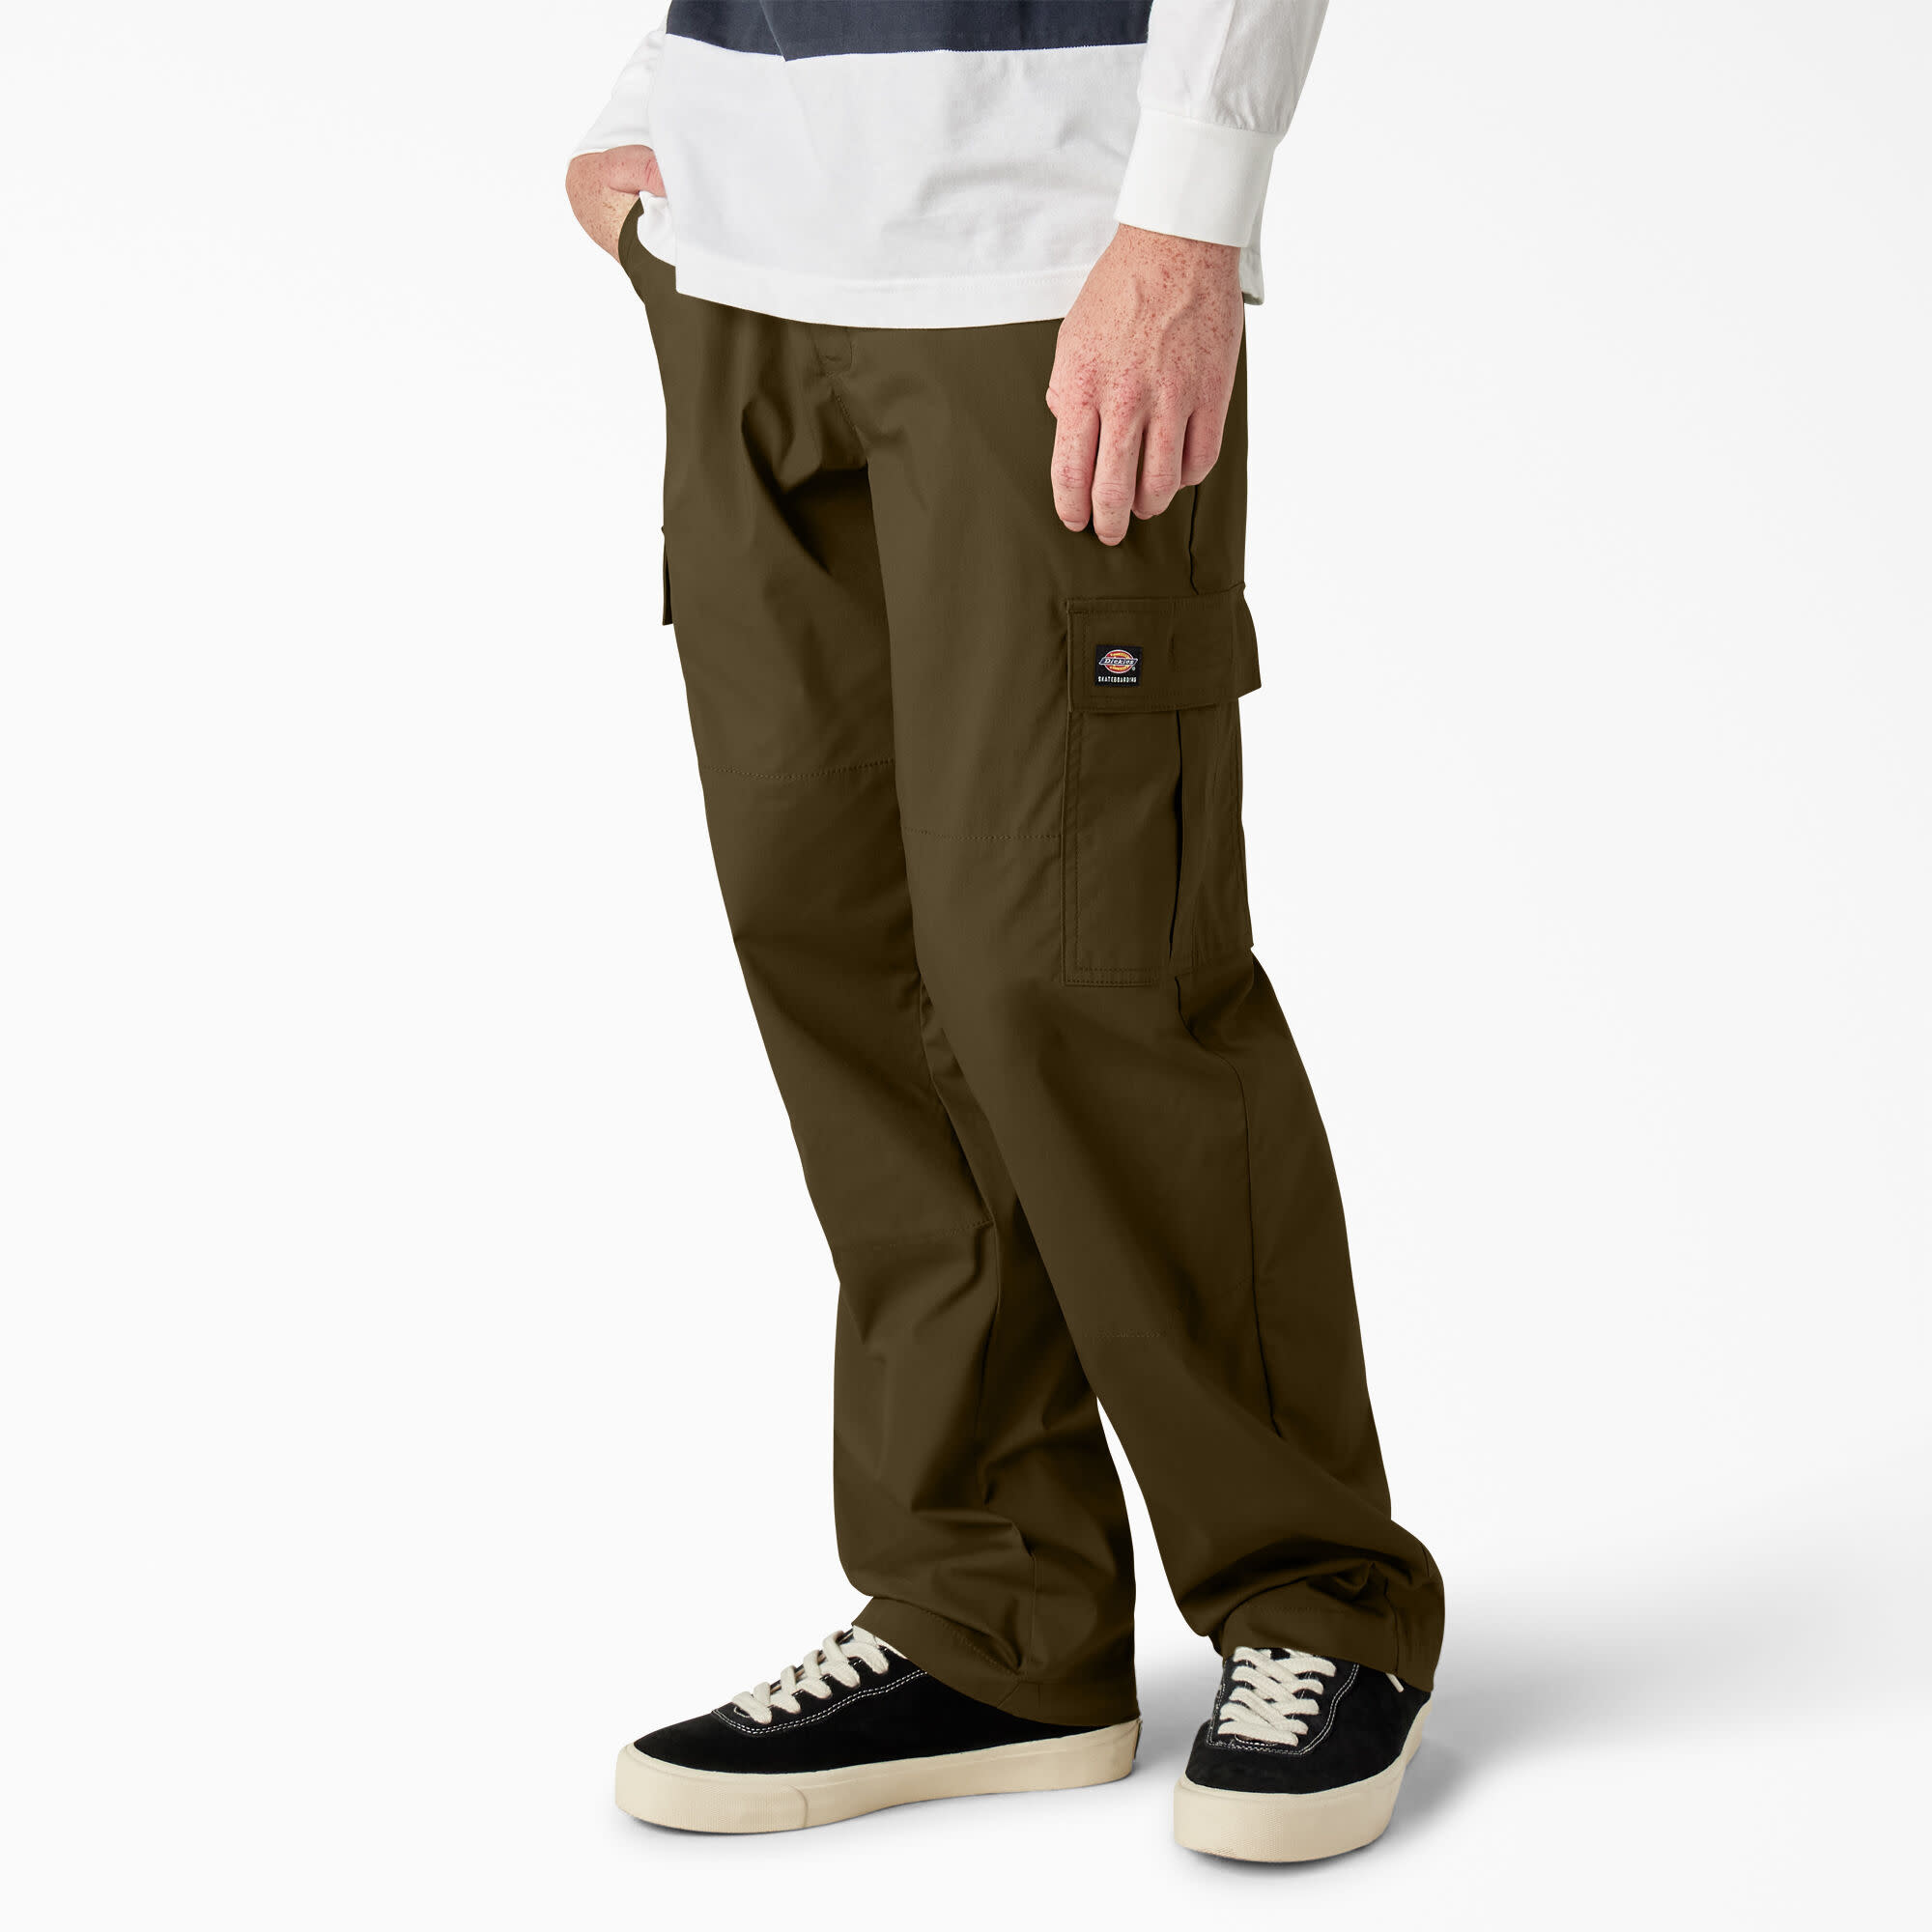 CARHARTT Relaxed Fit Cargo Pants | Cargo pants, Relaxed fit, Pants